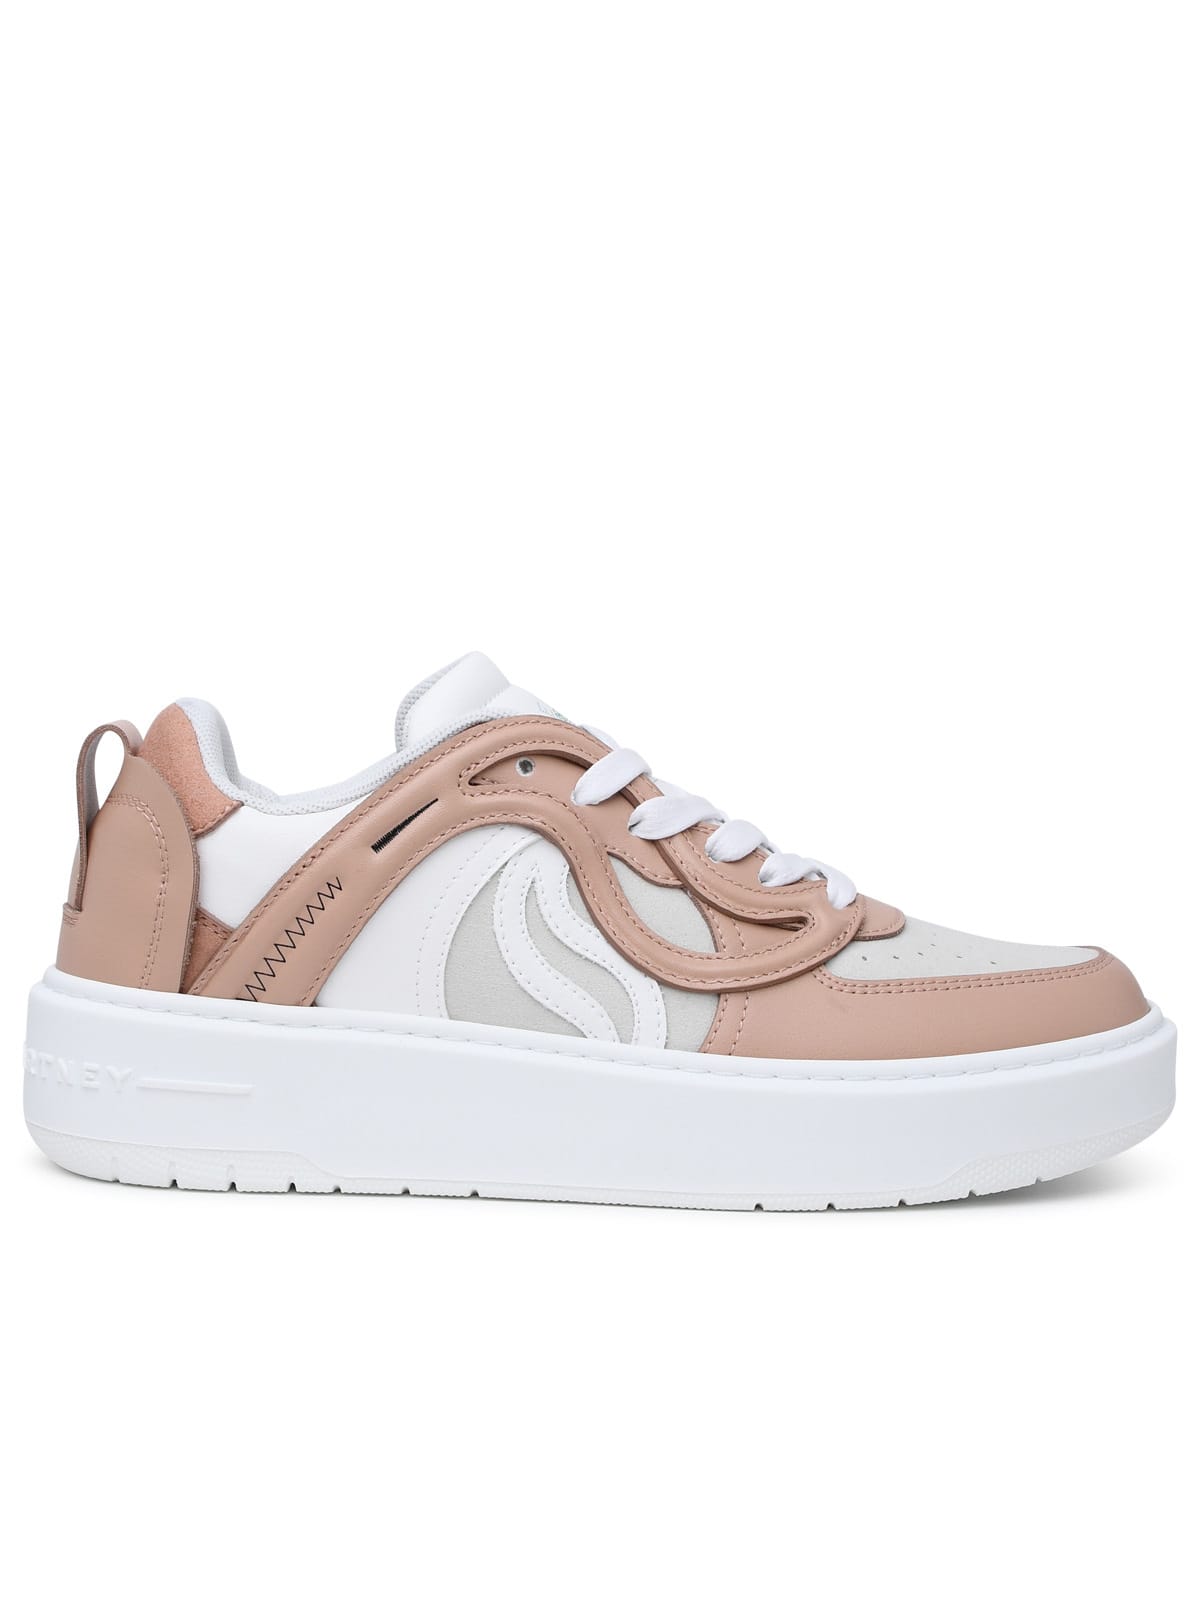 Stella Mccartney S Wave 1 Sneakers In A Powder Polyester Blend In Nude